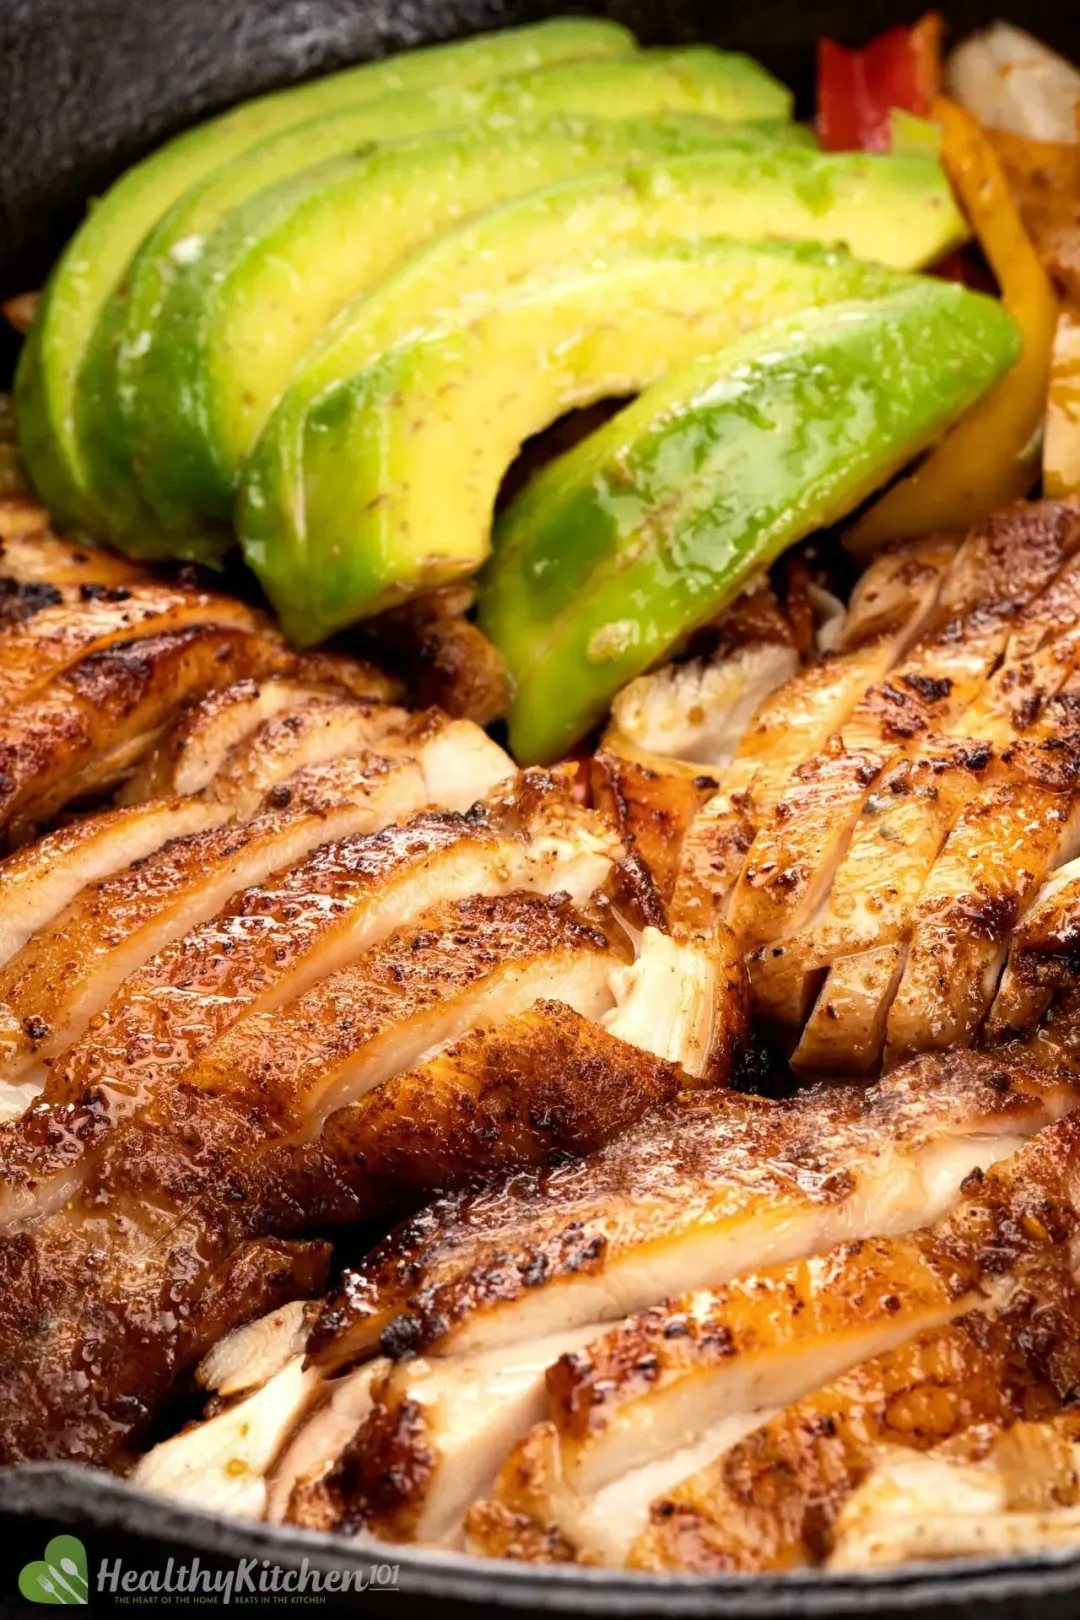 A close up of chicken slices and avocado slices